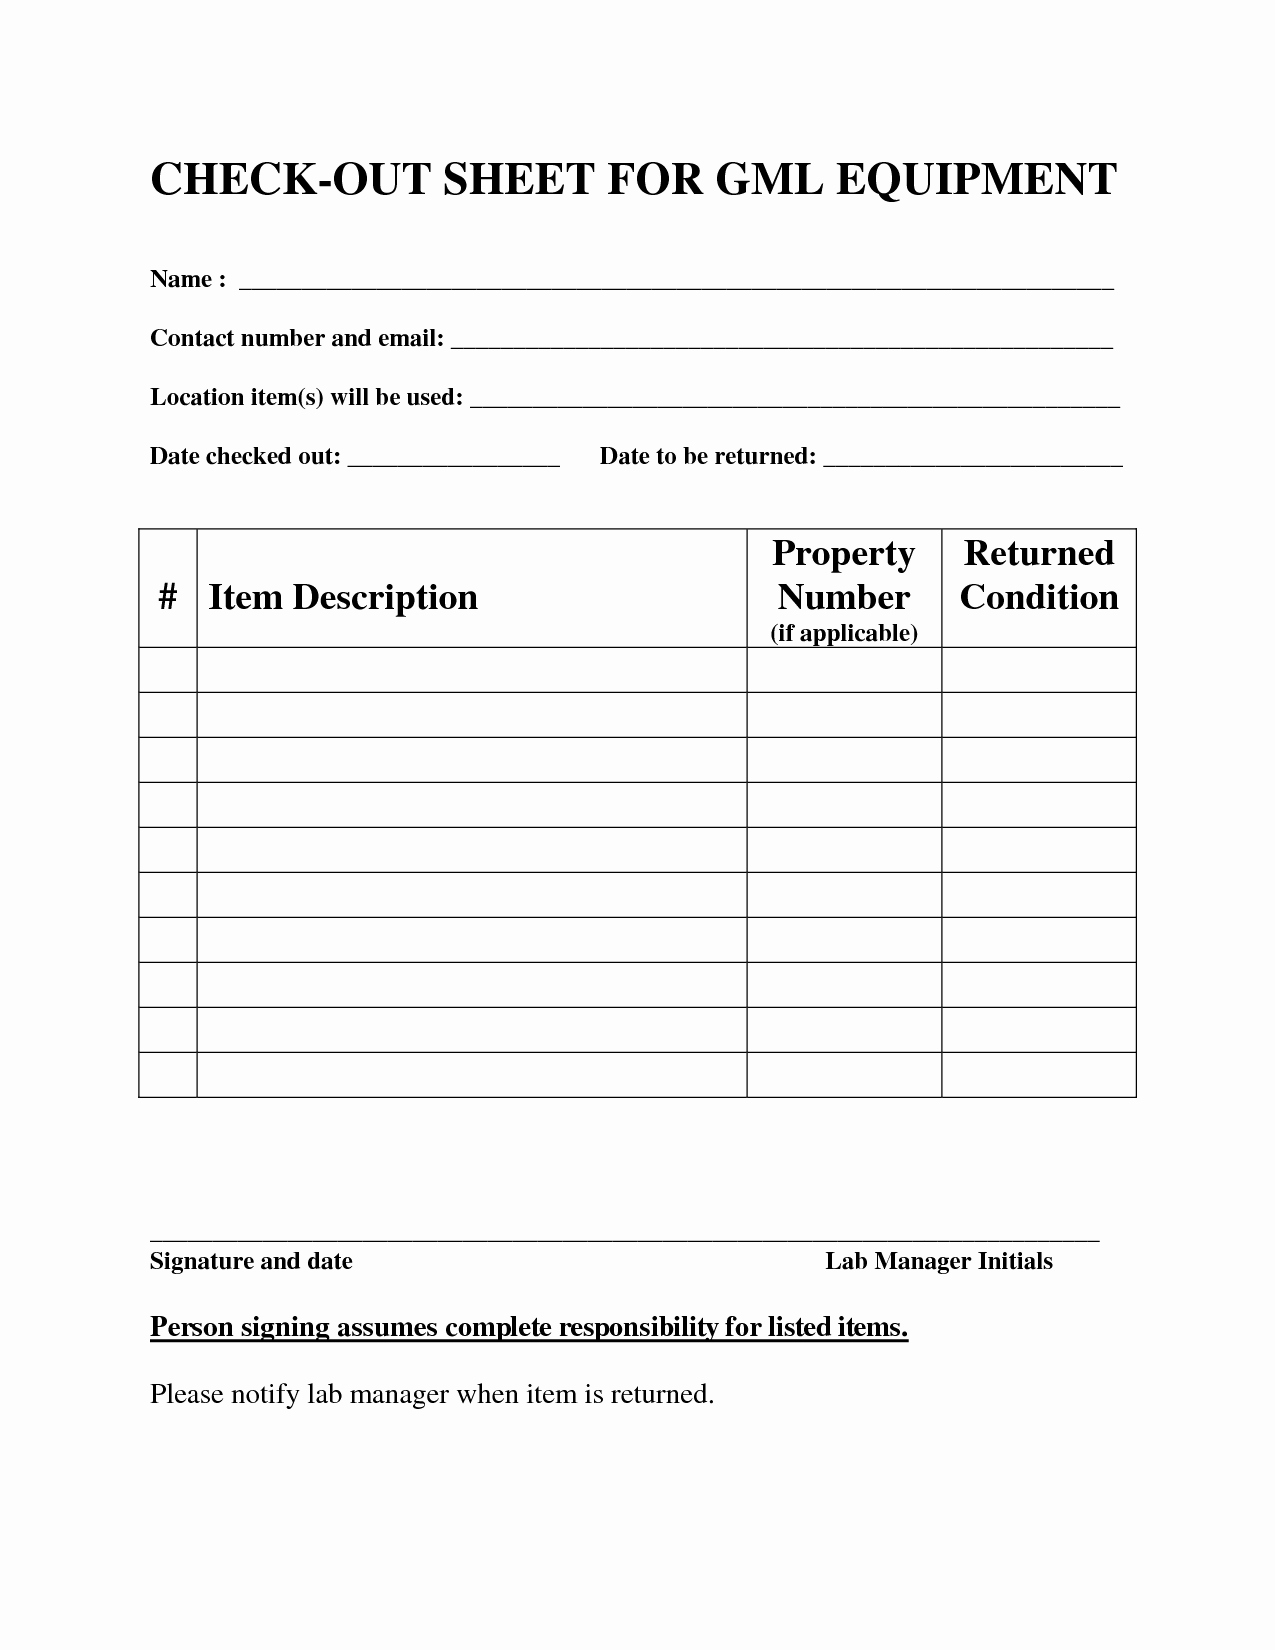 Check Out Sheet Template New Best S Of Check Out form Template Jail Equipment